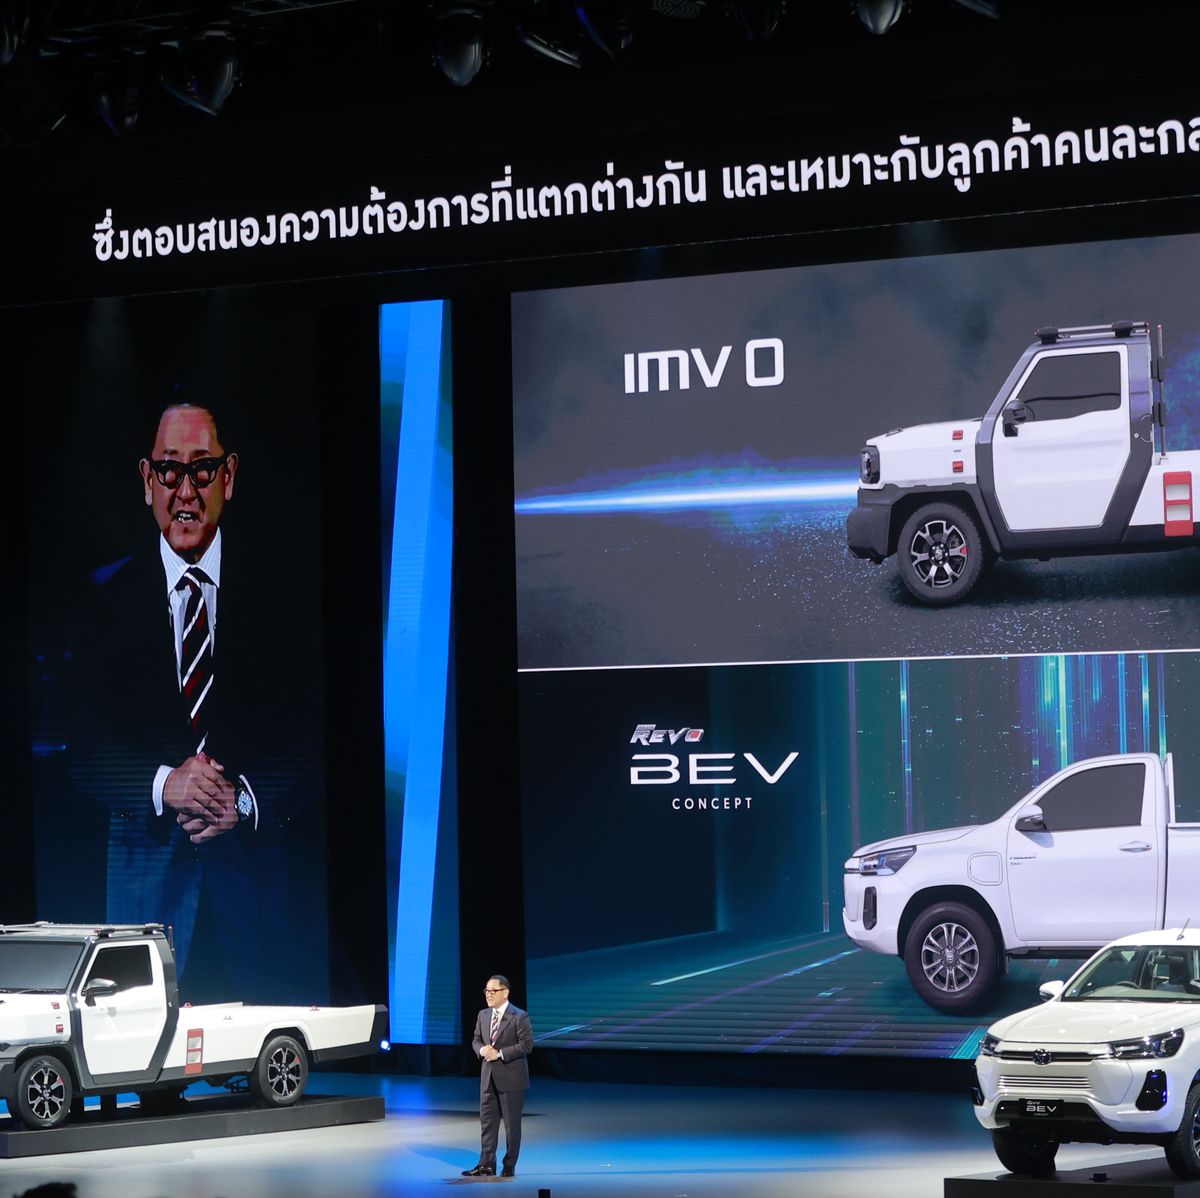 Compact Toyota electric pickup project revealed: Is it US-bound?